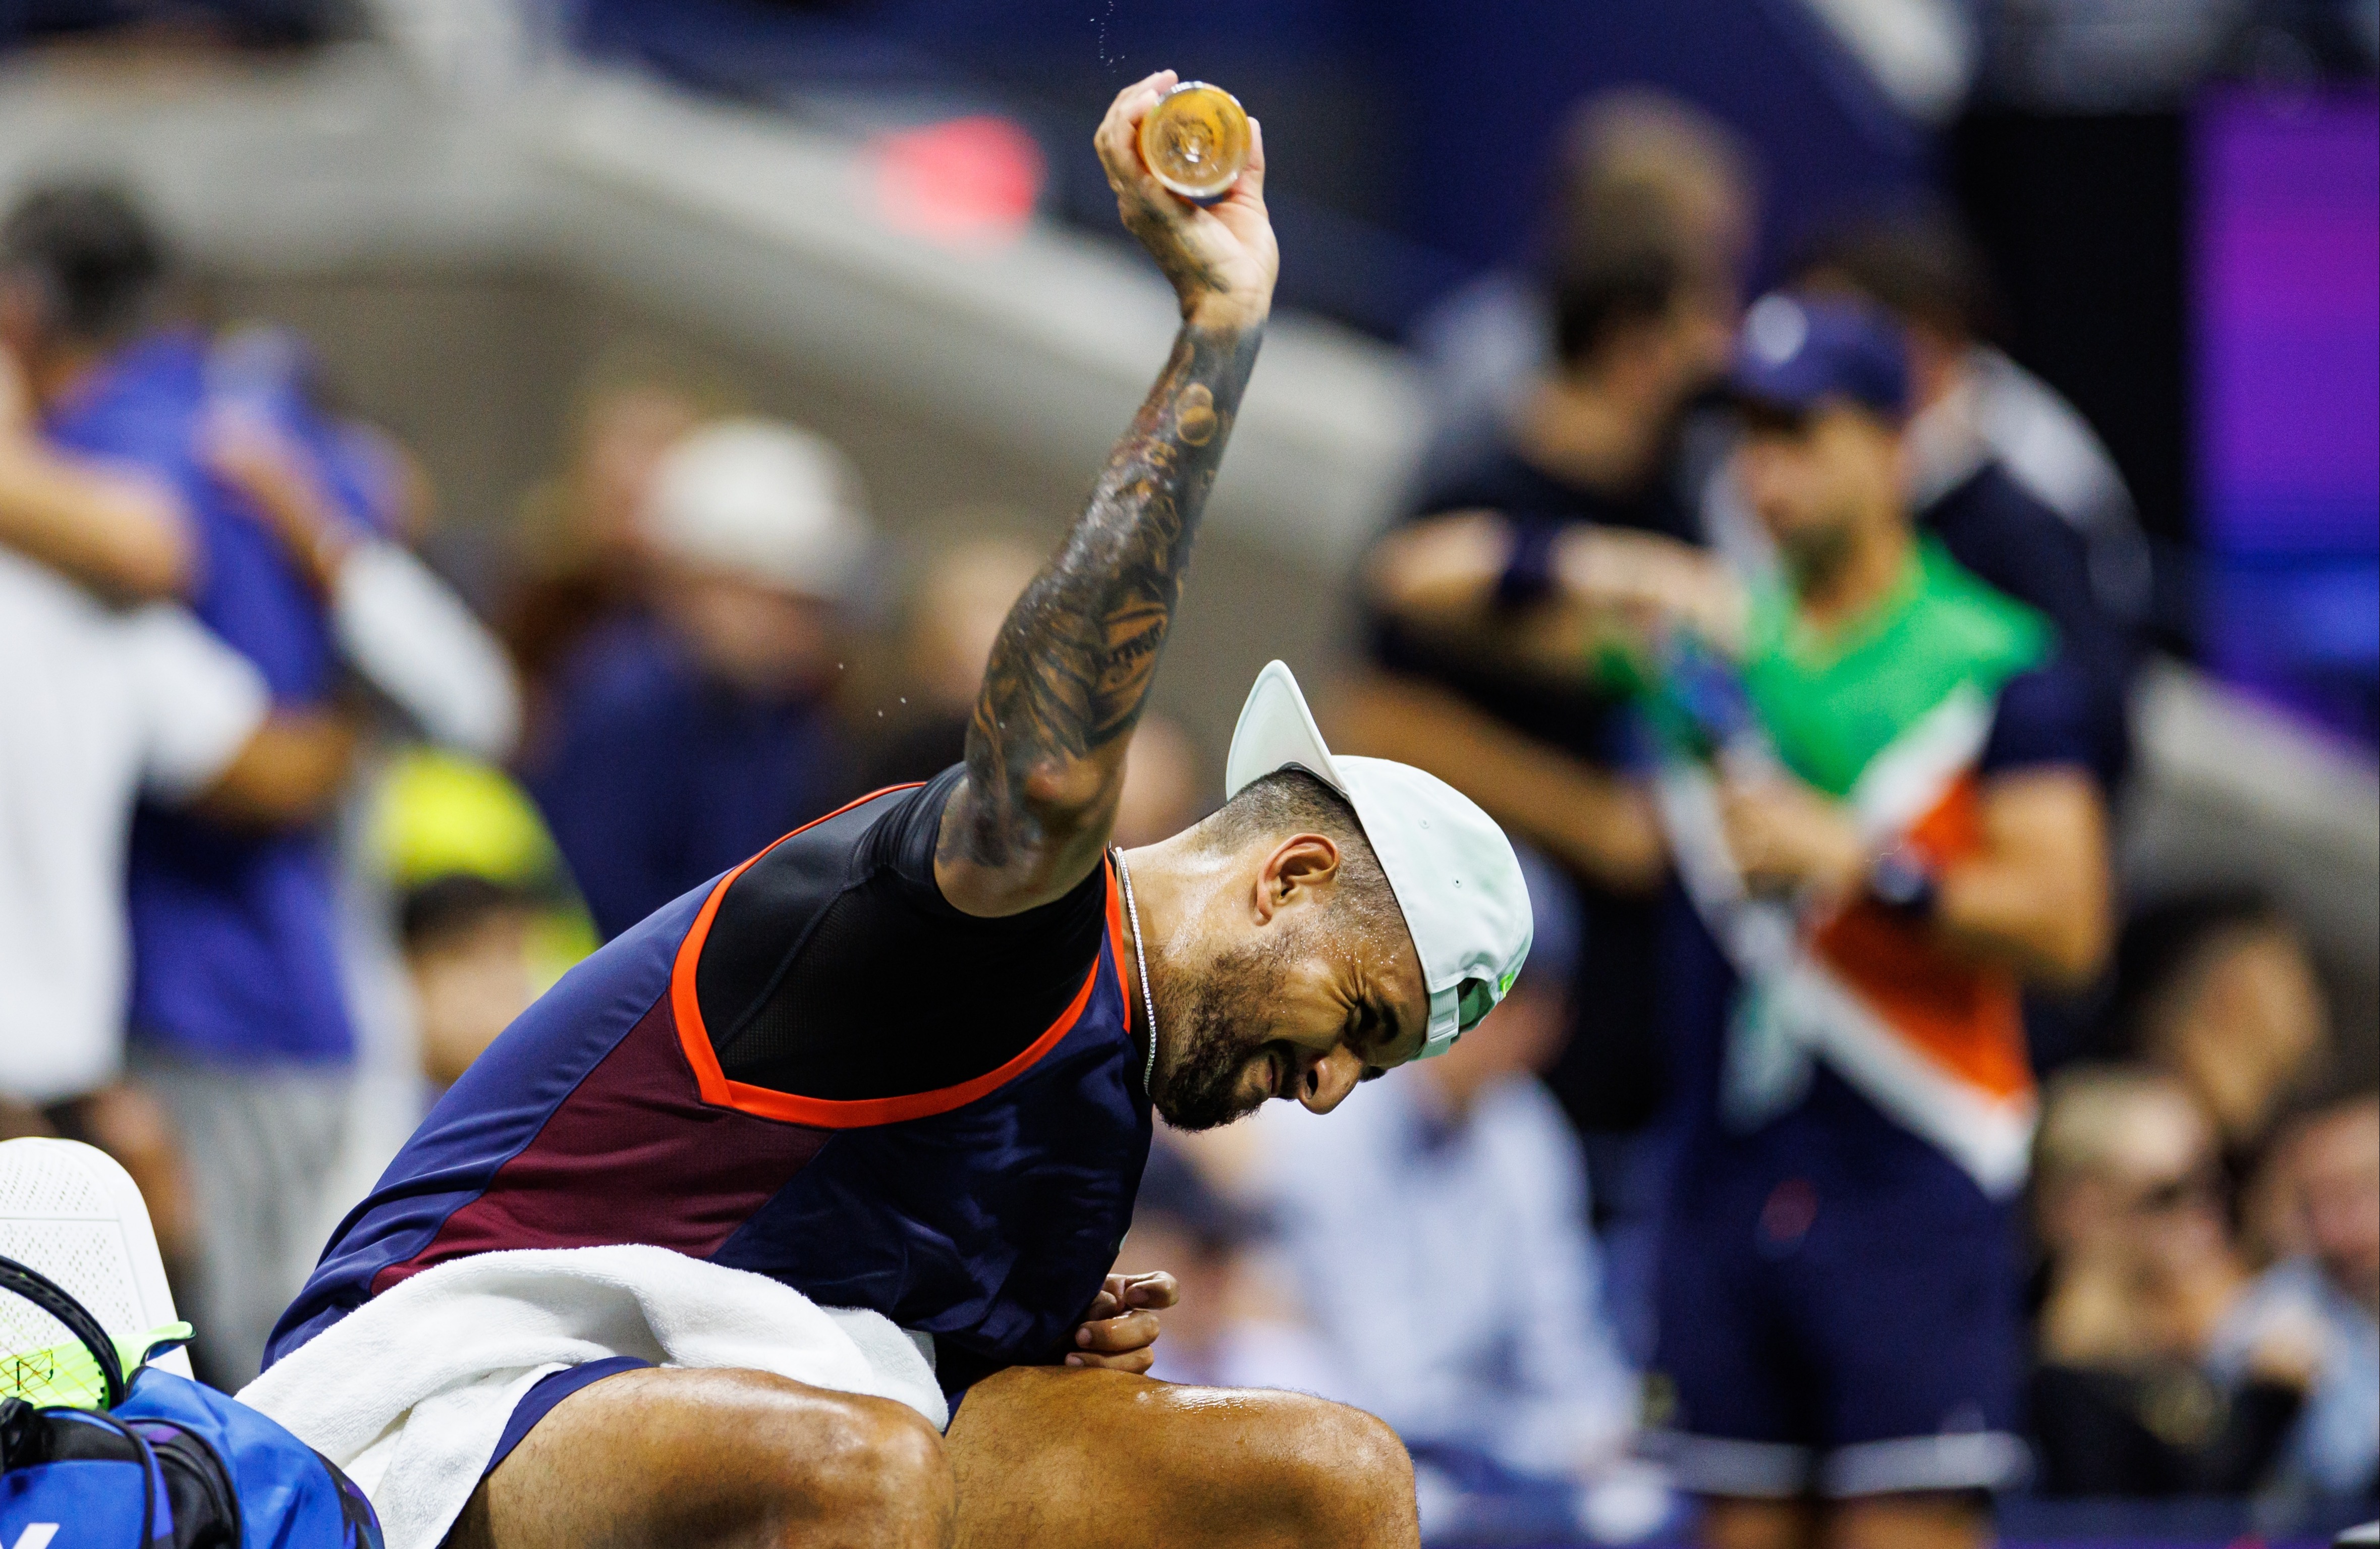 , Nick Kyrgios clashes with fans, smashes racket, throws bottle on court and spits towards his team after US Open defeat